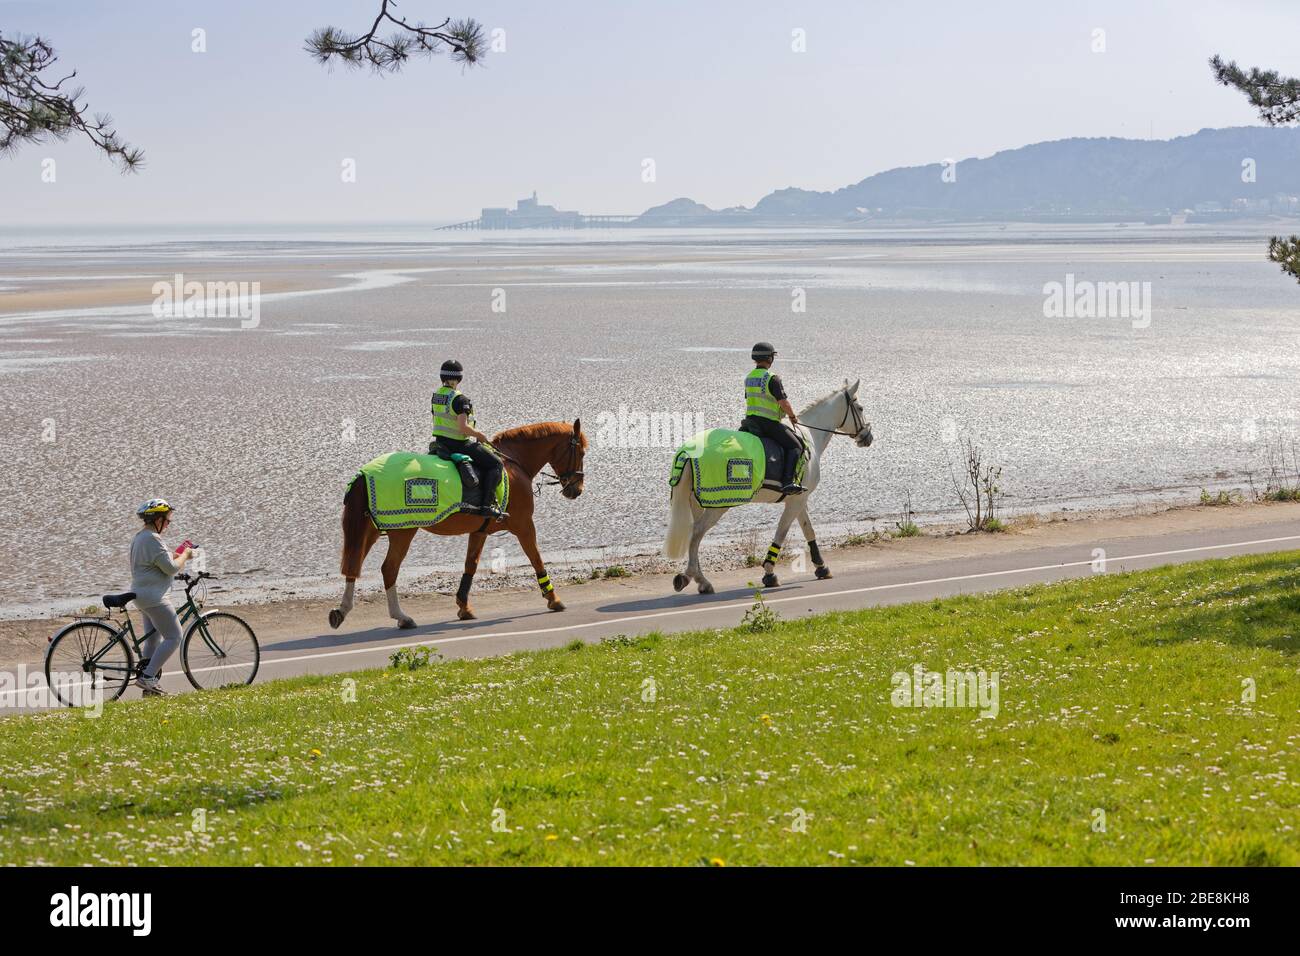 Pictured: Two mounted police officers patrol the path in West Cross by Swansea Bay, Wales, UK. Friday 10 April 2020 Re: Easter Weekend, Covid-19 Coron Stock Photo